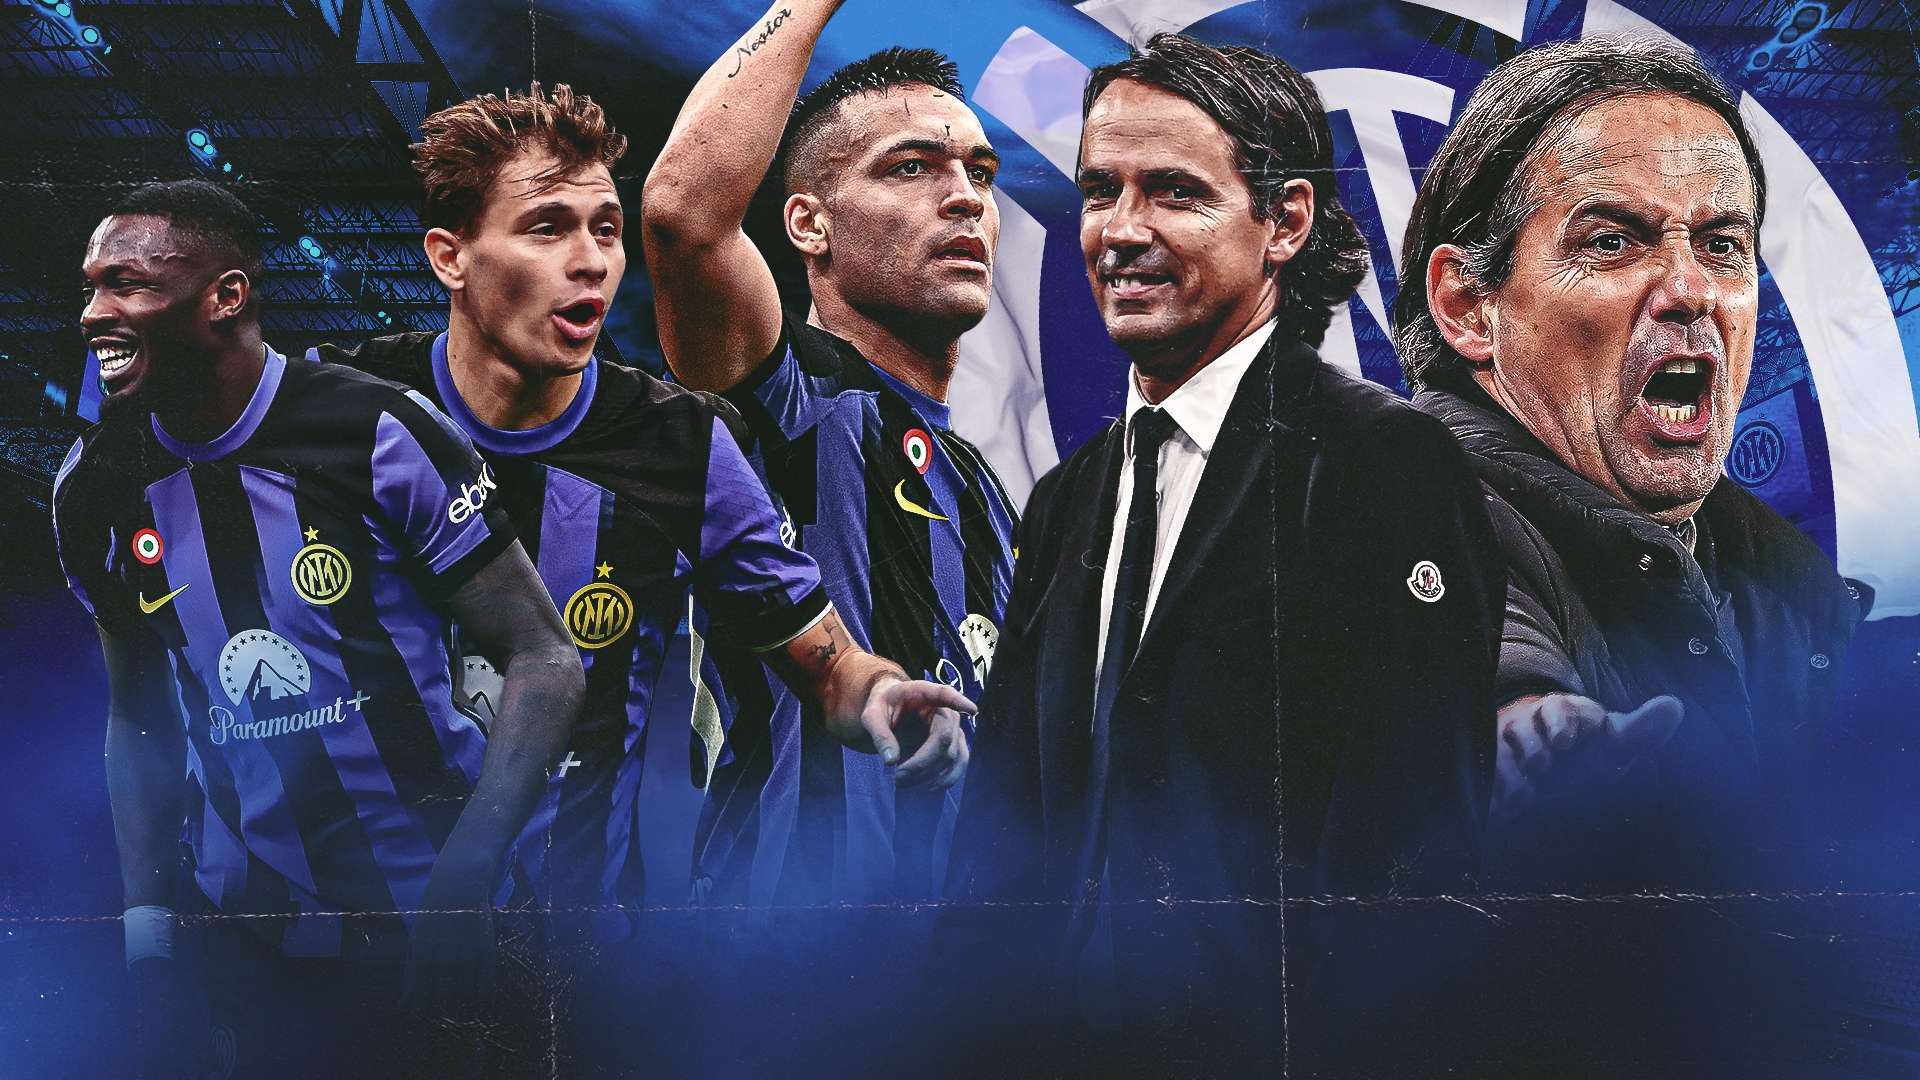 Inzaghi Europe's most underrated coach GFX